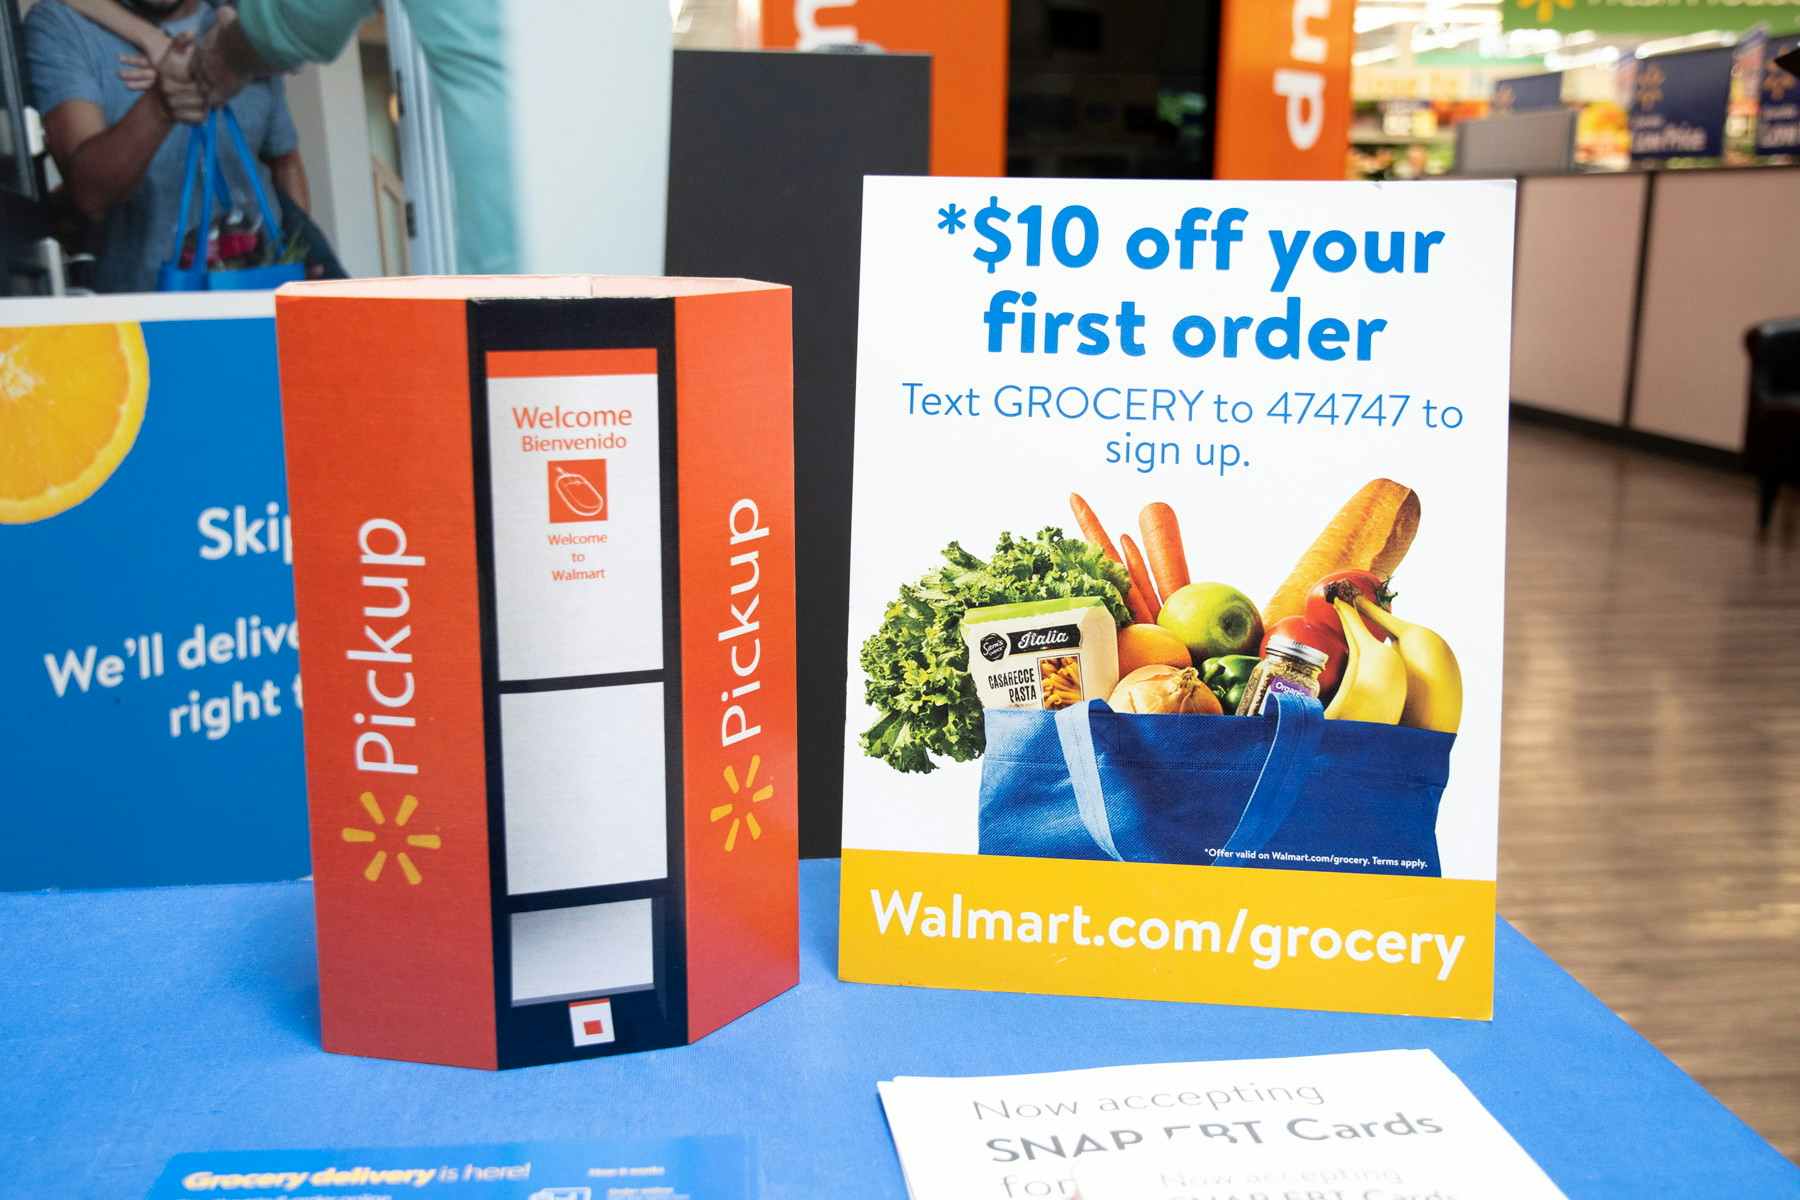 Counter at Walmart that has a sign for pickup and a sign that says $10 off your first order